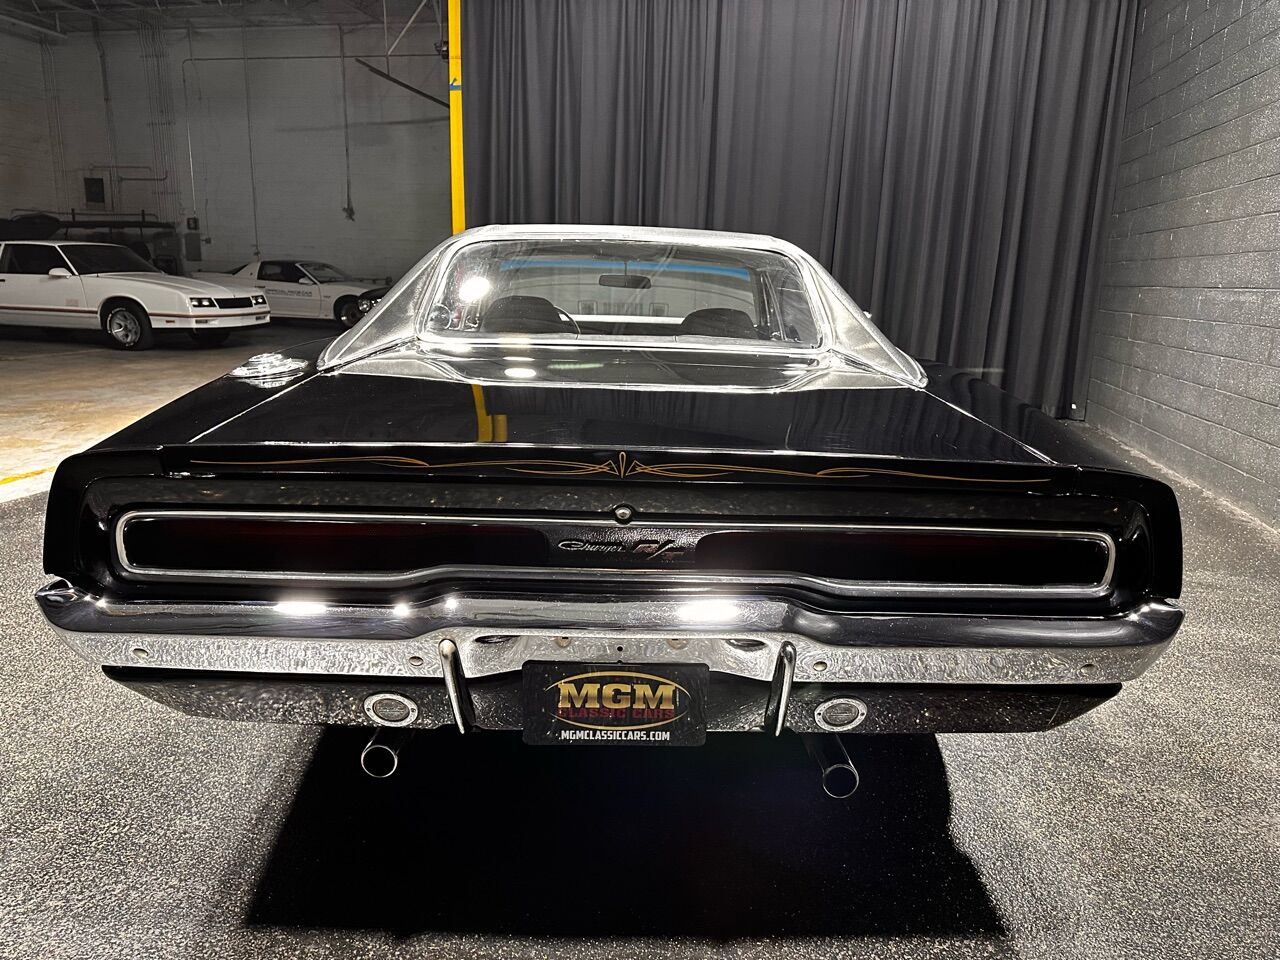 1970 Dodge Charger 5